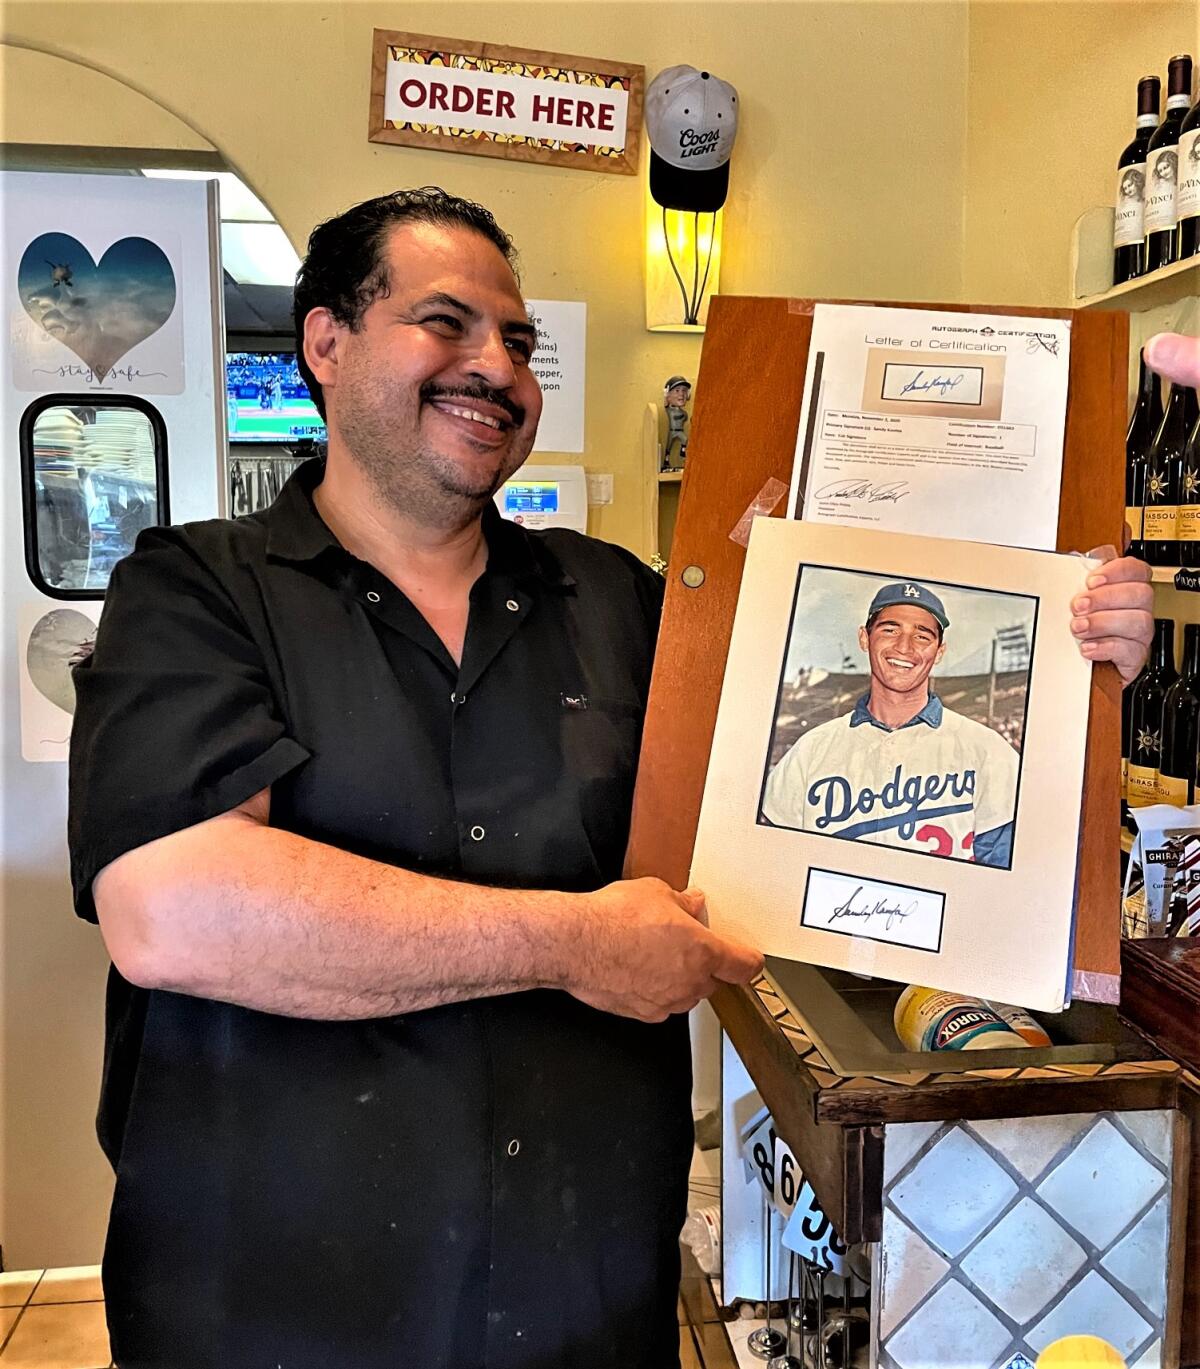 Juan Gomez holds up a portrait of Dodgers great Sandy Koufax in his restaurant Penne Pasta in Lehaina, Hawaii